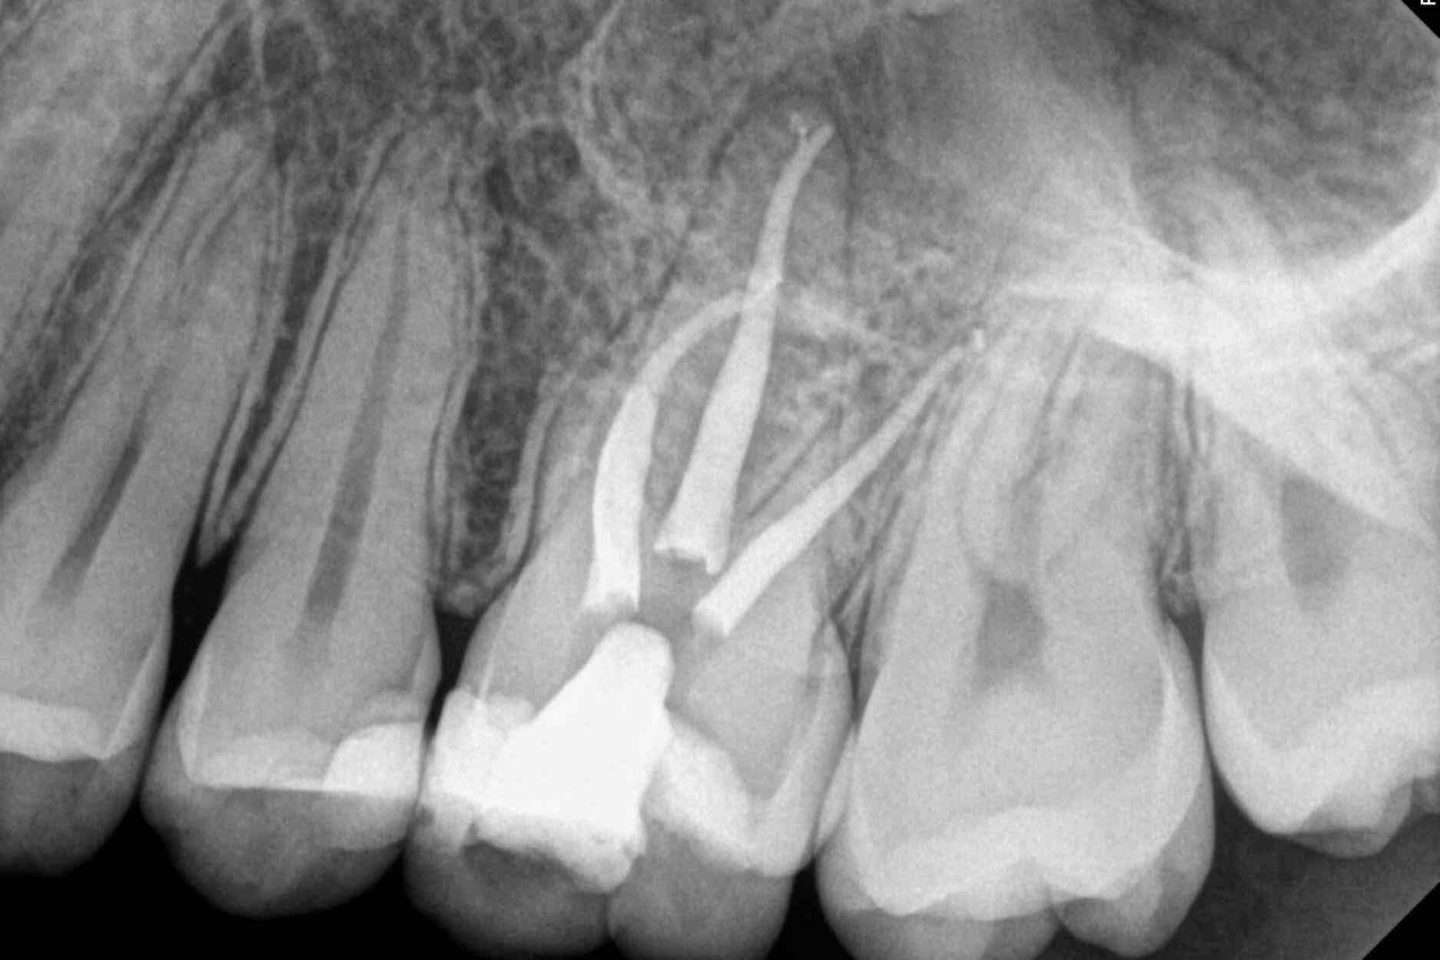 After molar root canal